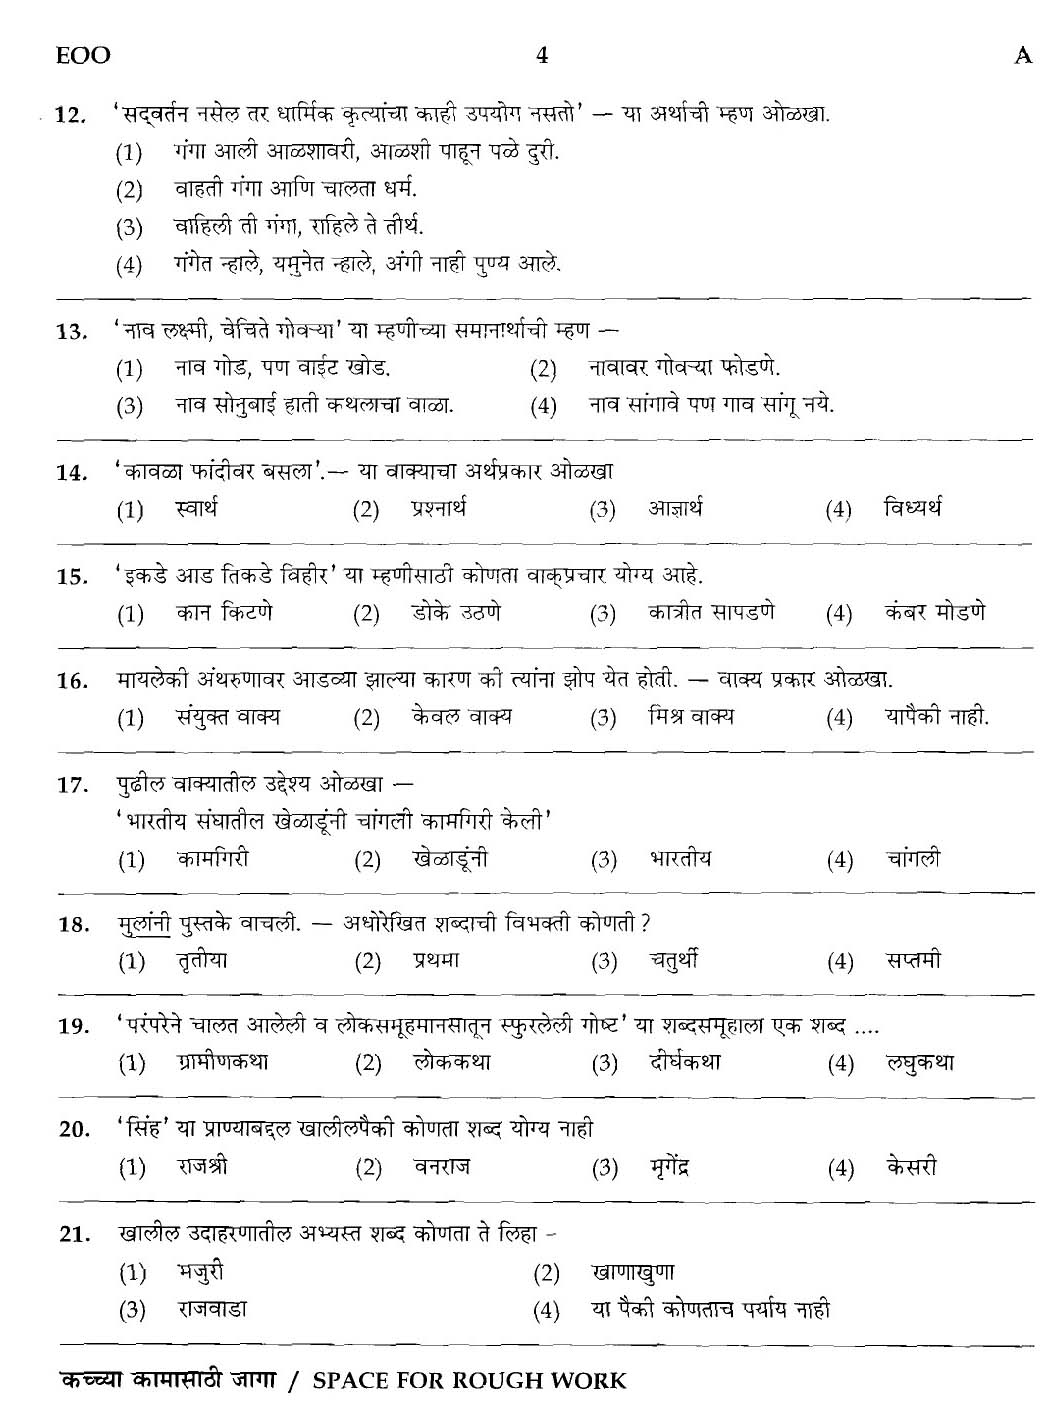 MPSC Agricultural Services Preliminary Exam 2012 Question Paper 3